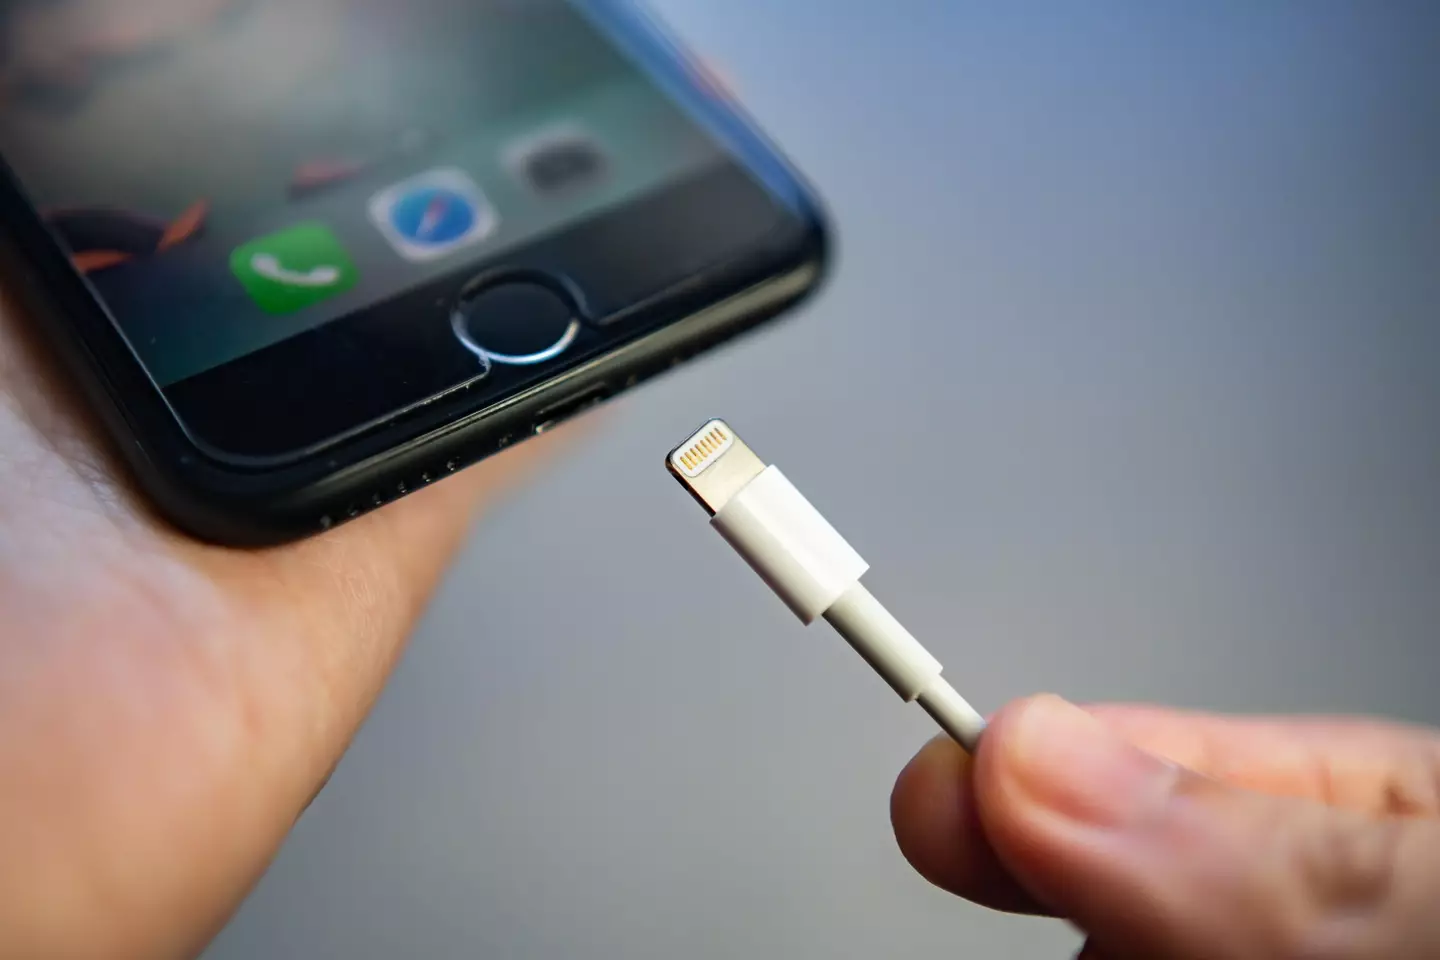 Apple has agreed to ditch the lightning cable to conform with new EU regulations.